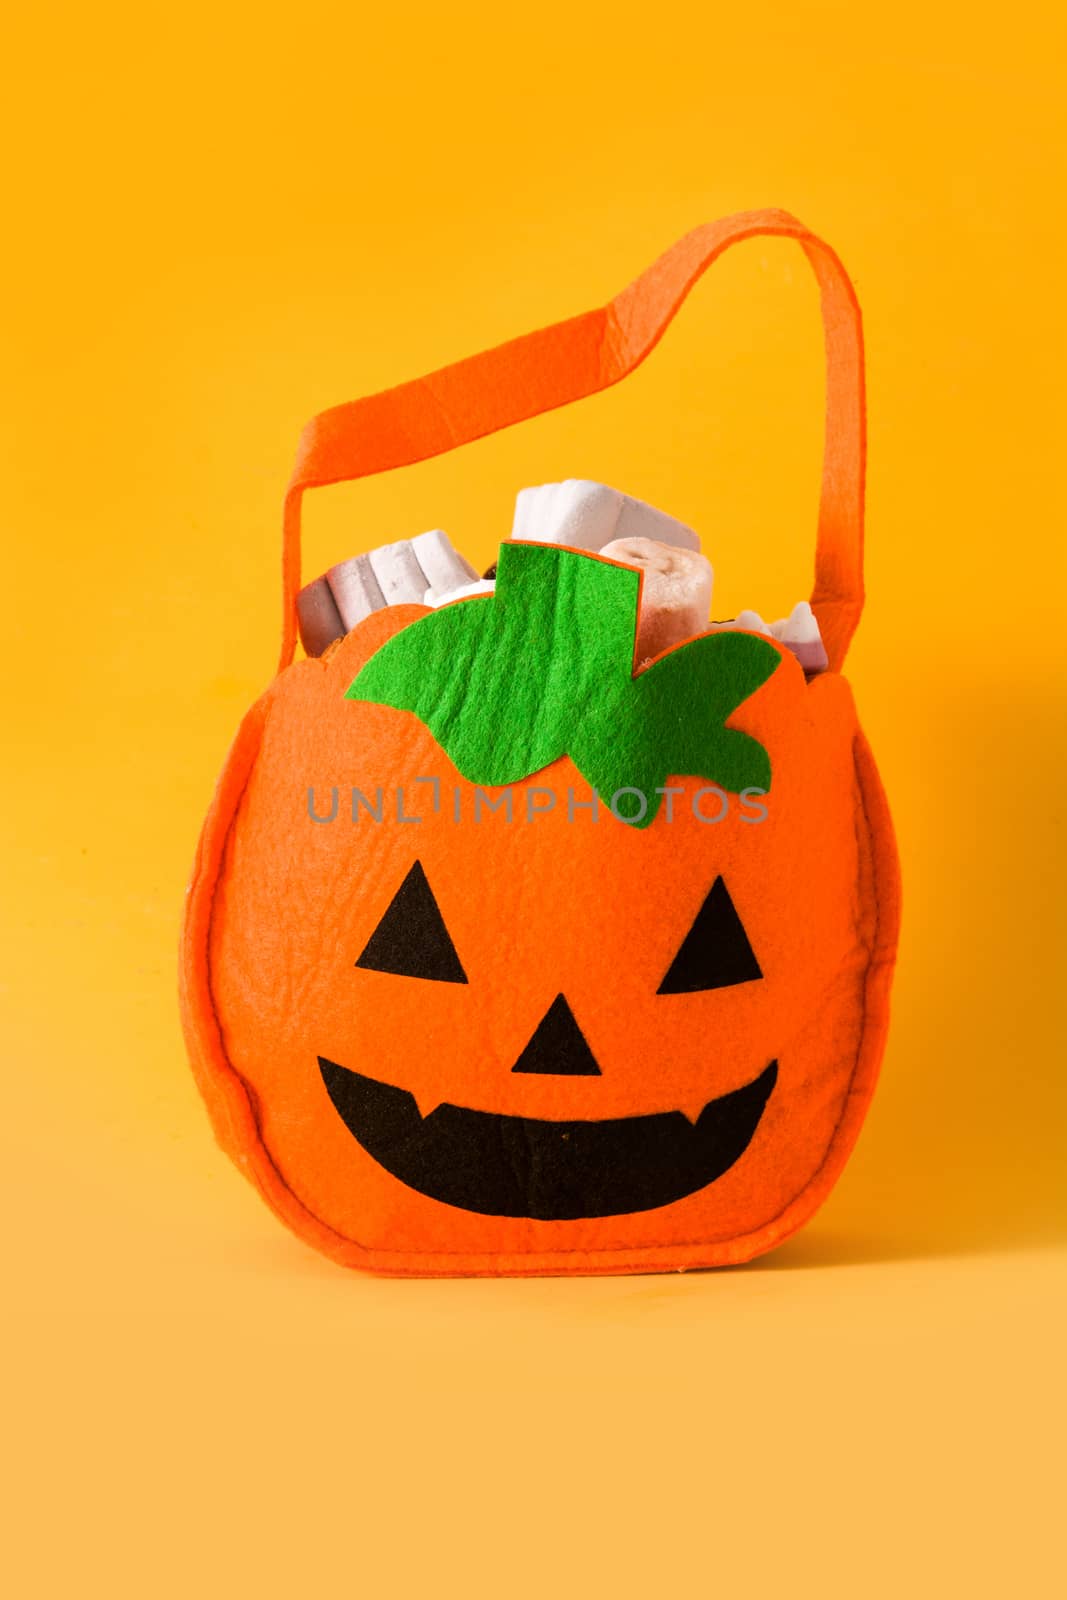 Hand holding Halloween pumpkin bag with candies  by chandlervid85